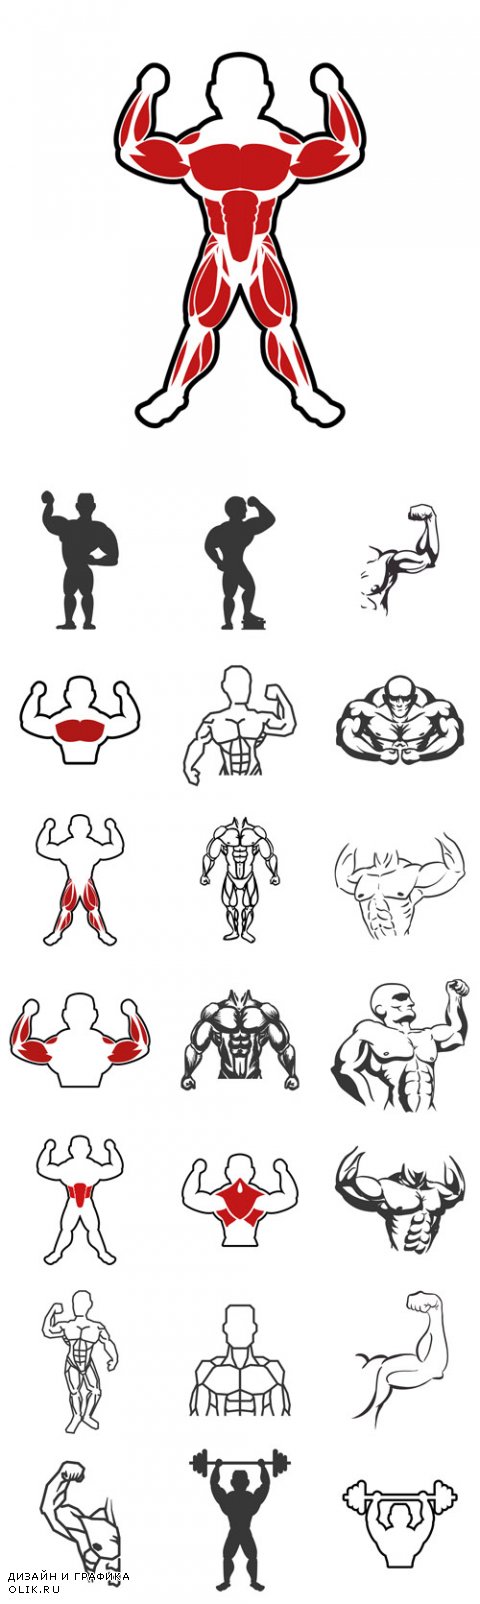 Vector Healthy lifestyle and bodybuilder concept represented by Muscle man icon